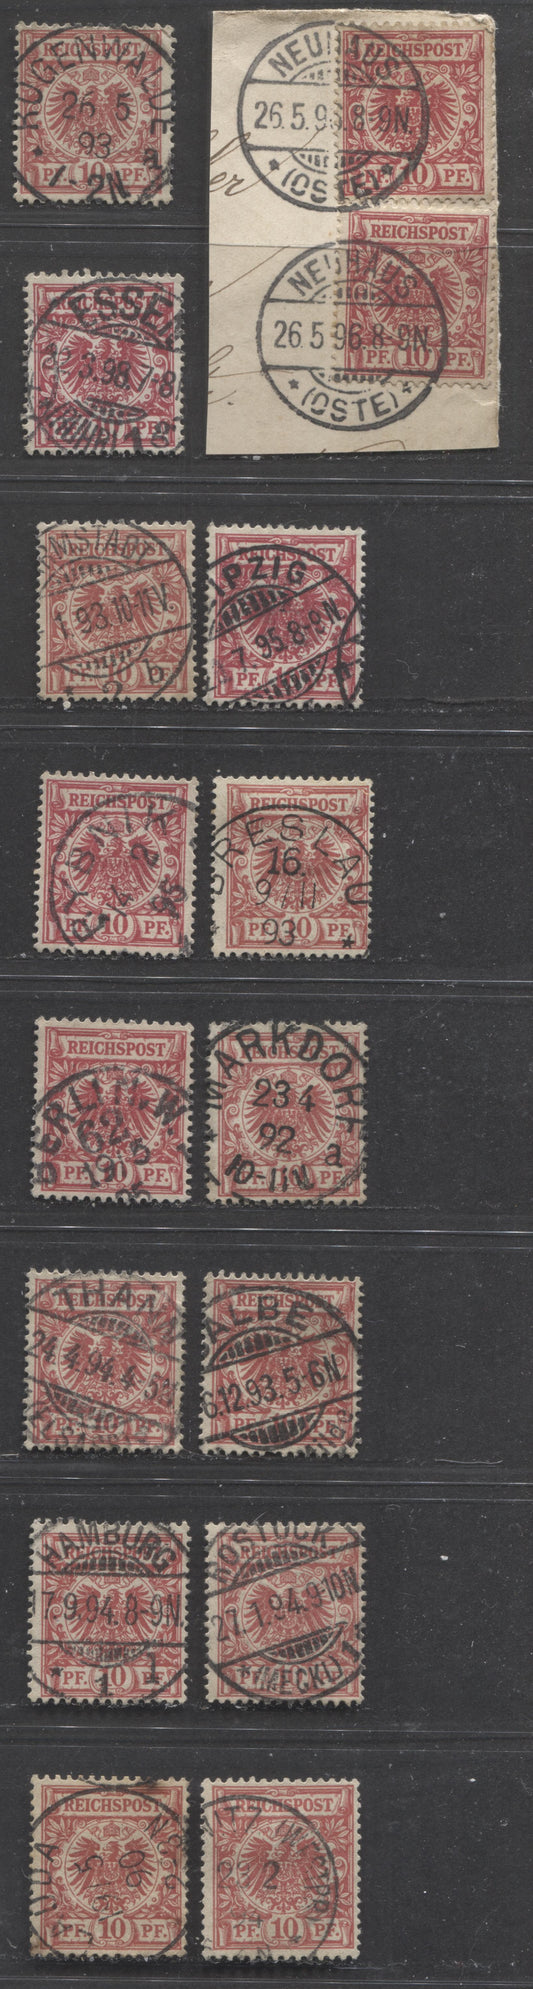 Lot 429 Germany SC#48 10pf Carmine & Rose Carmine 1889-1900 Numeral & Eagle Issue, All With SON Town Cancels, Including May 26, 1893 Rugenwalde, Poland, 14 Fine & VF Used Singles & Pair, Click on Listing to See ALL Pictures, Estimated Value $75